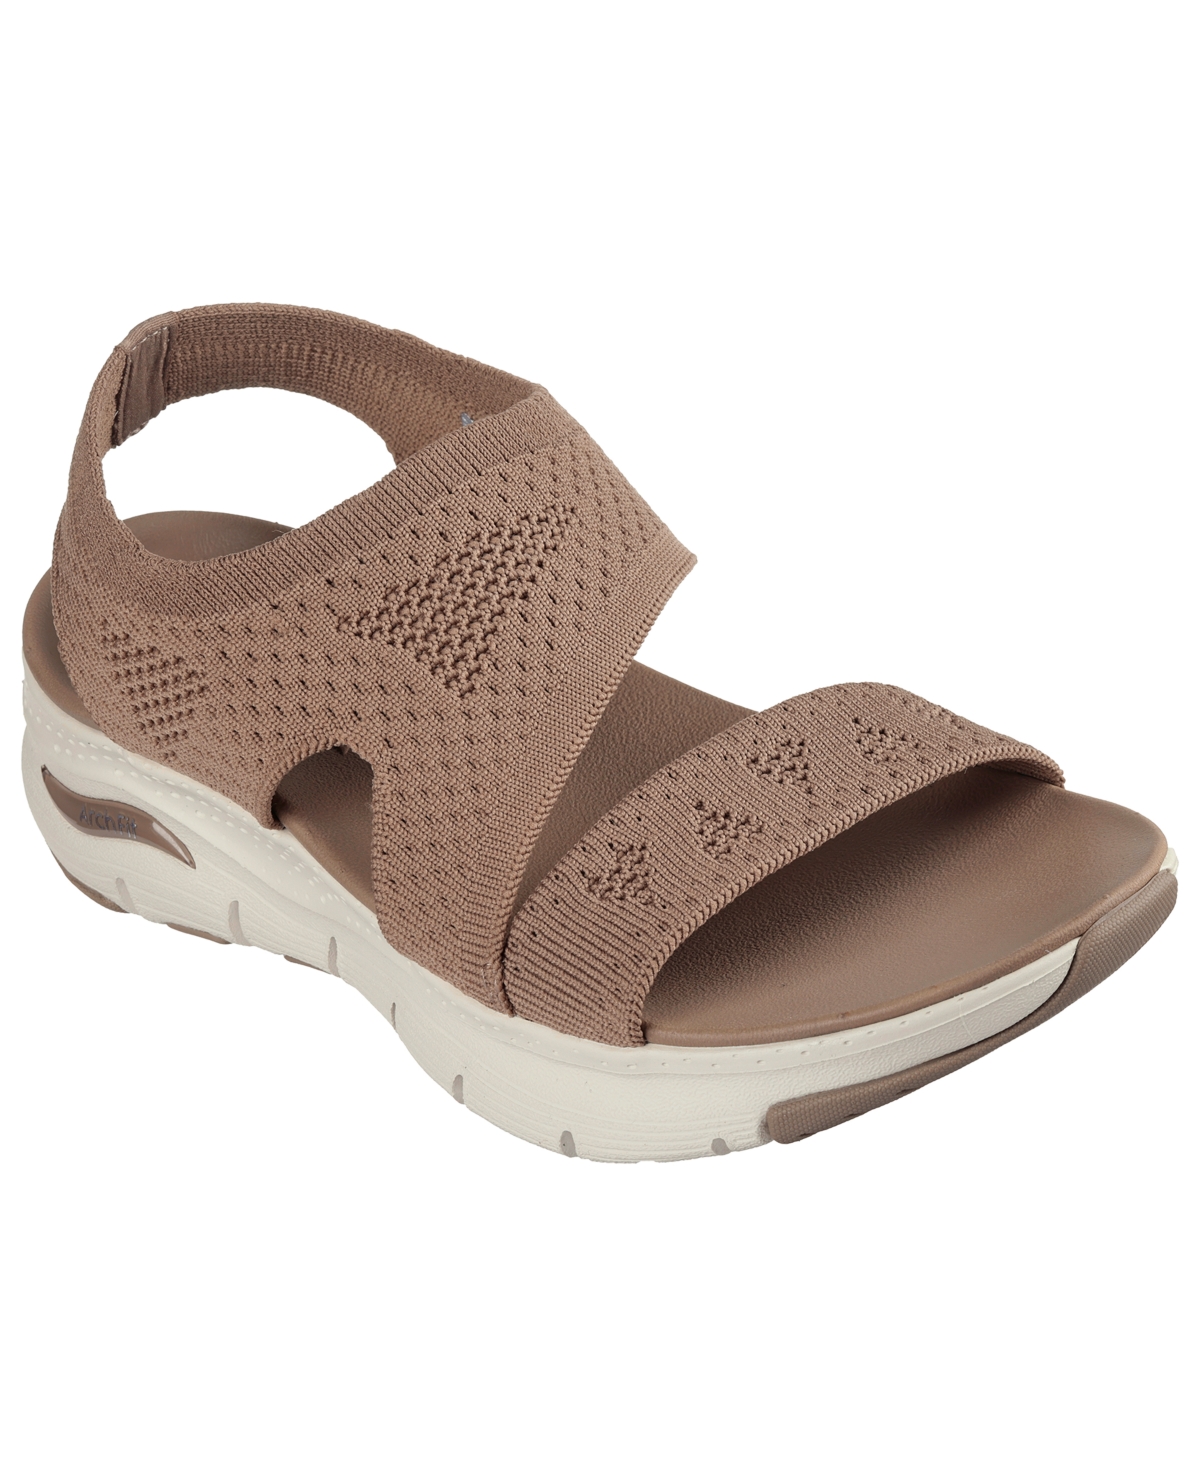 Women's Cali Arch Fit - Brightest Day Slip-On Sandals from Finish Line - Mocha